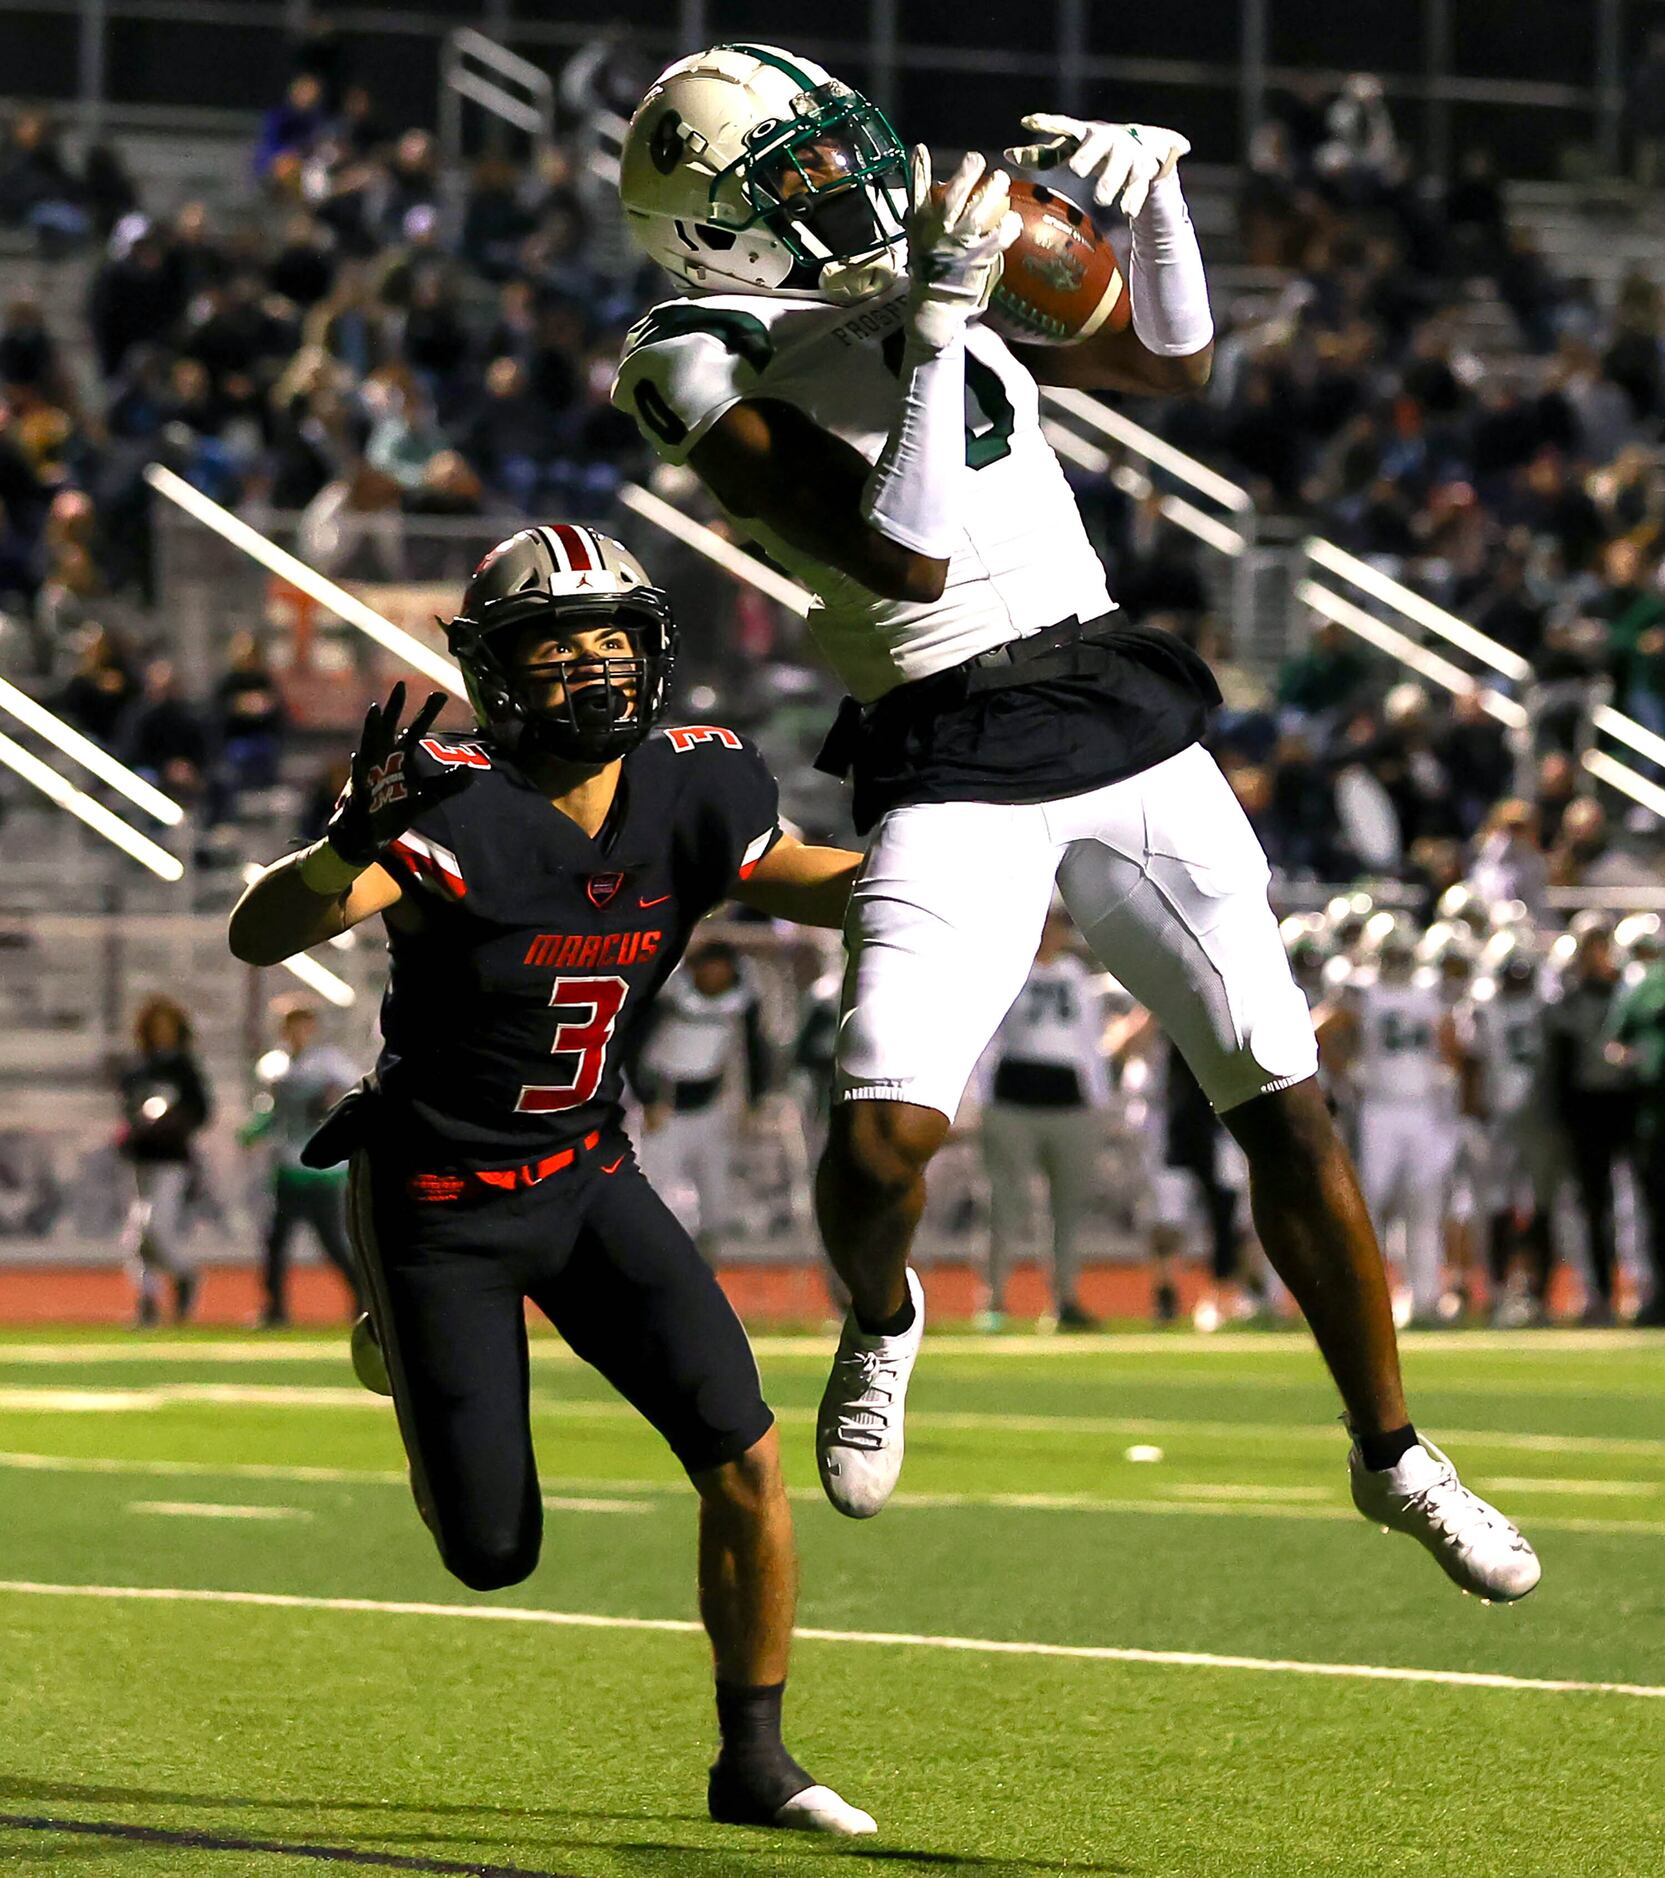 Prosper wide receiver Tyler Bailey (0) comes up with a 13 yard touchdown reception against...